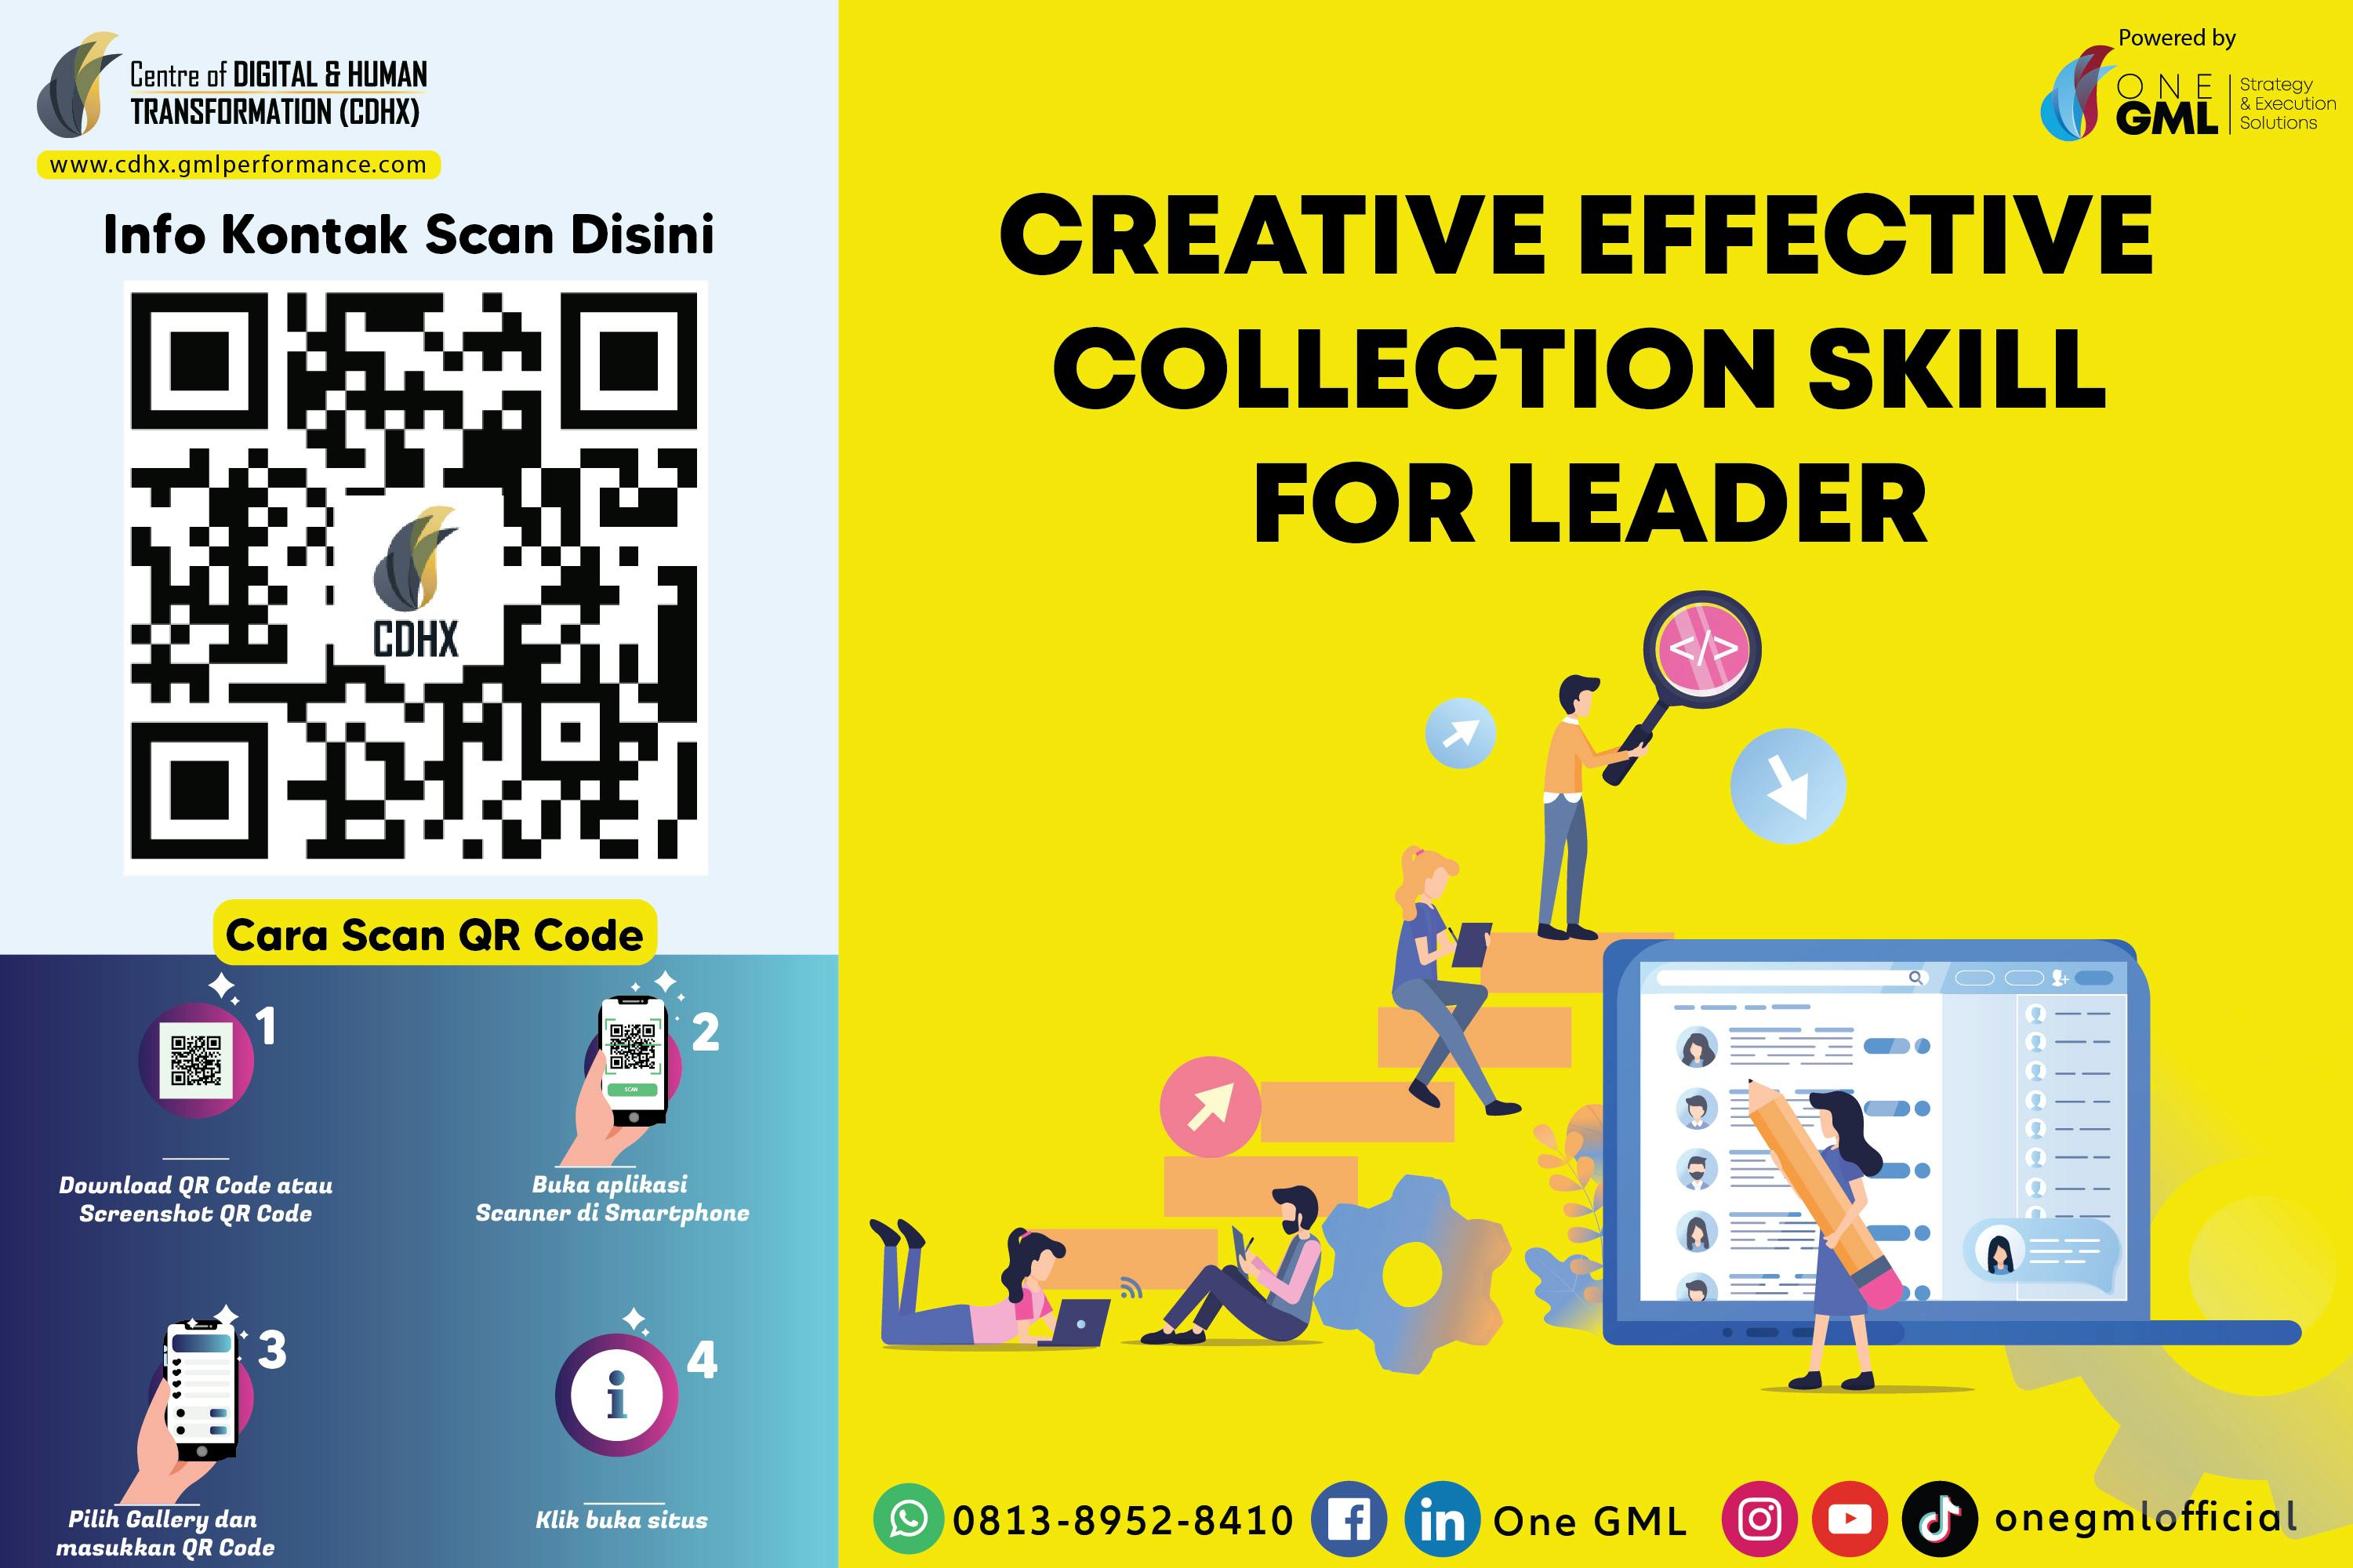 Creative Effective Collection Skill for Leader